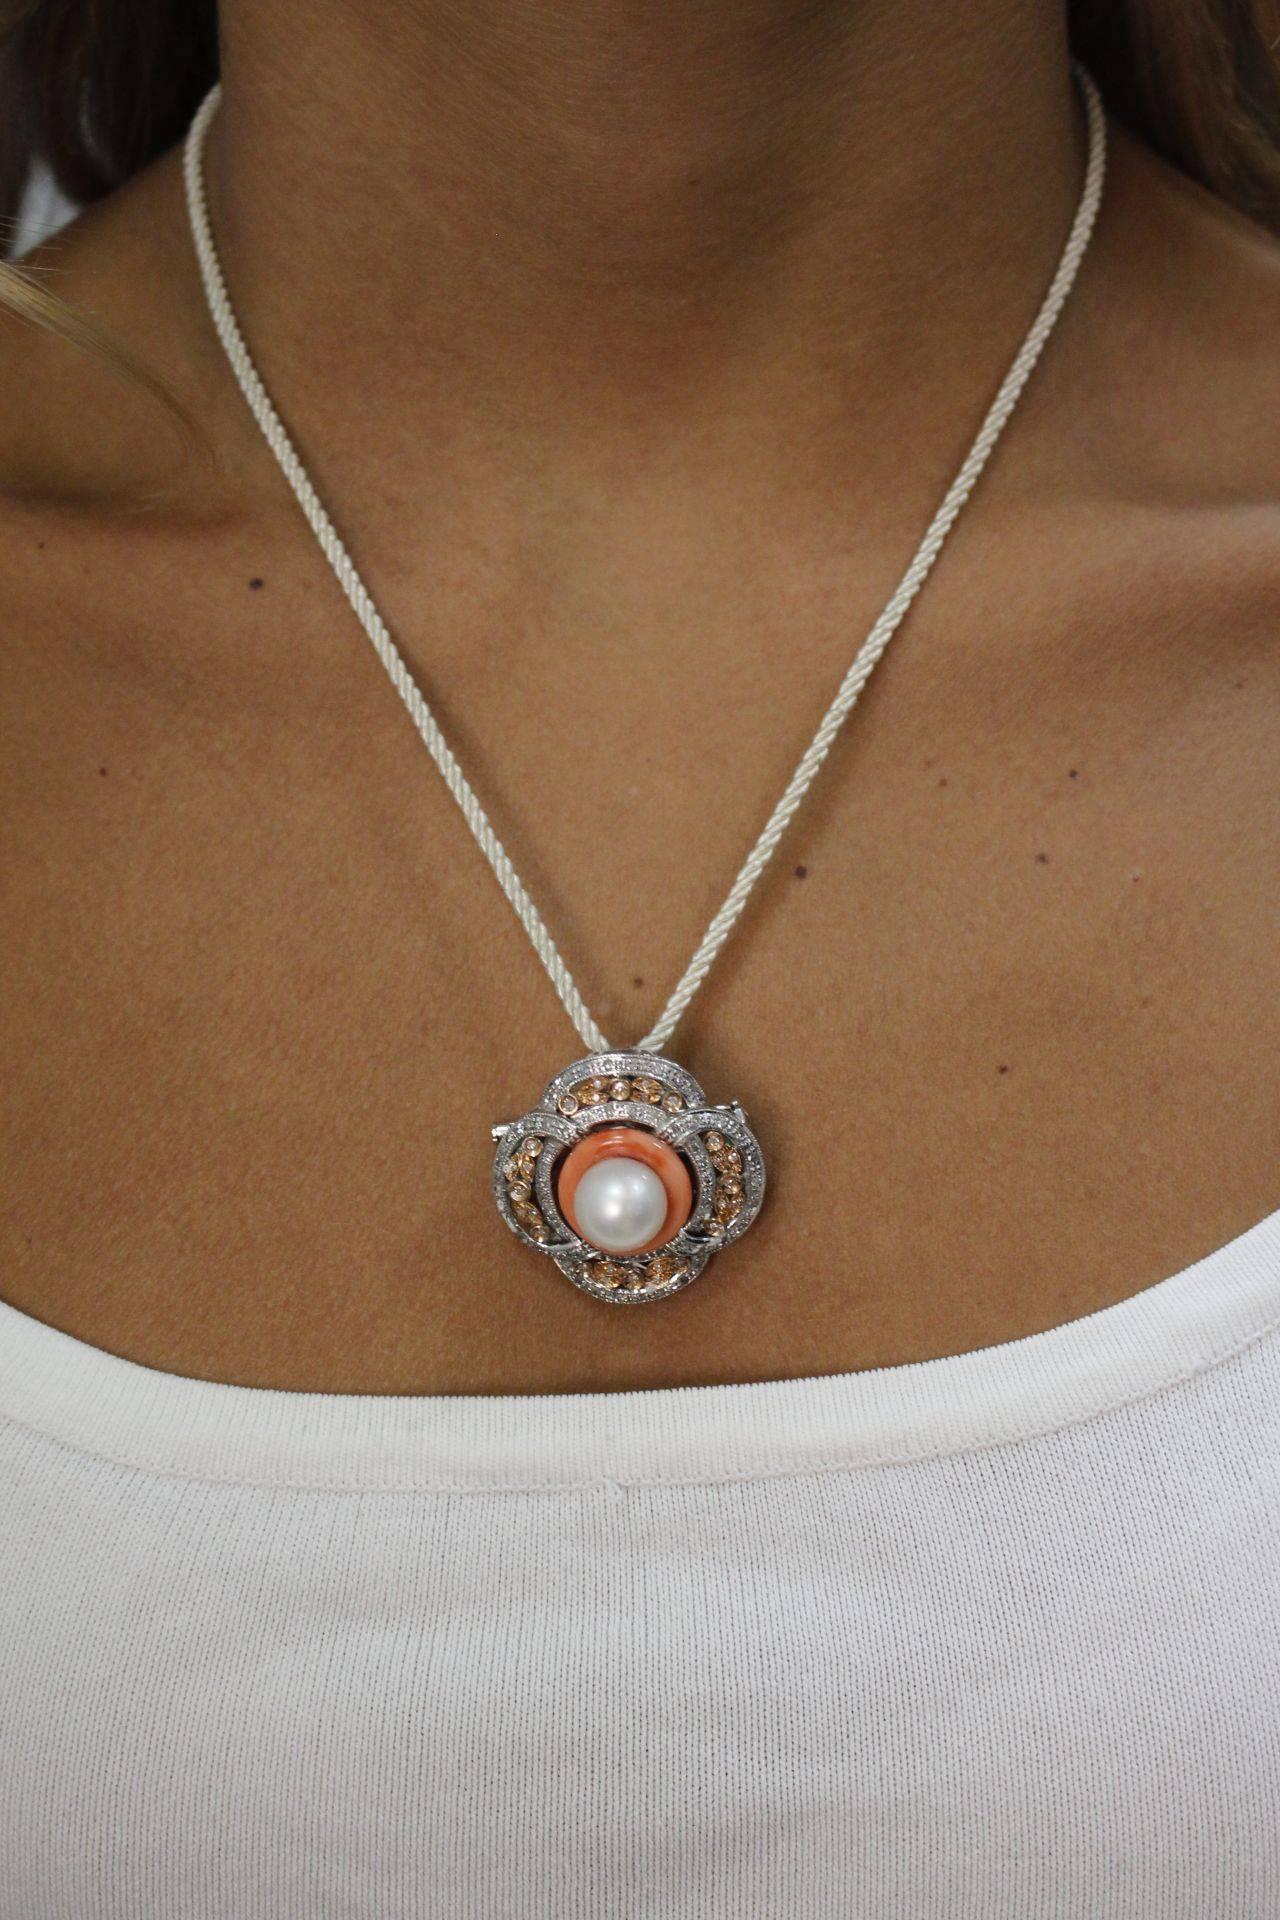 Round Cut Diamonds, Australian Pearl,  Coral Ring, White Gold Brooch/Pendant Necklac For Sale